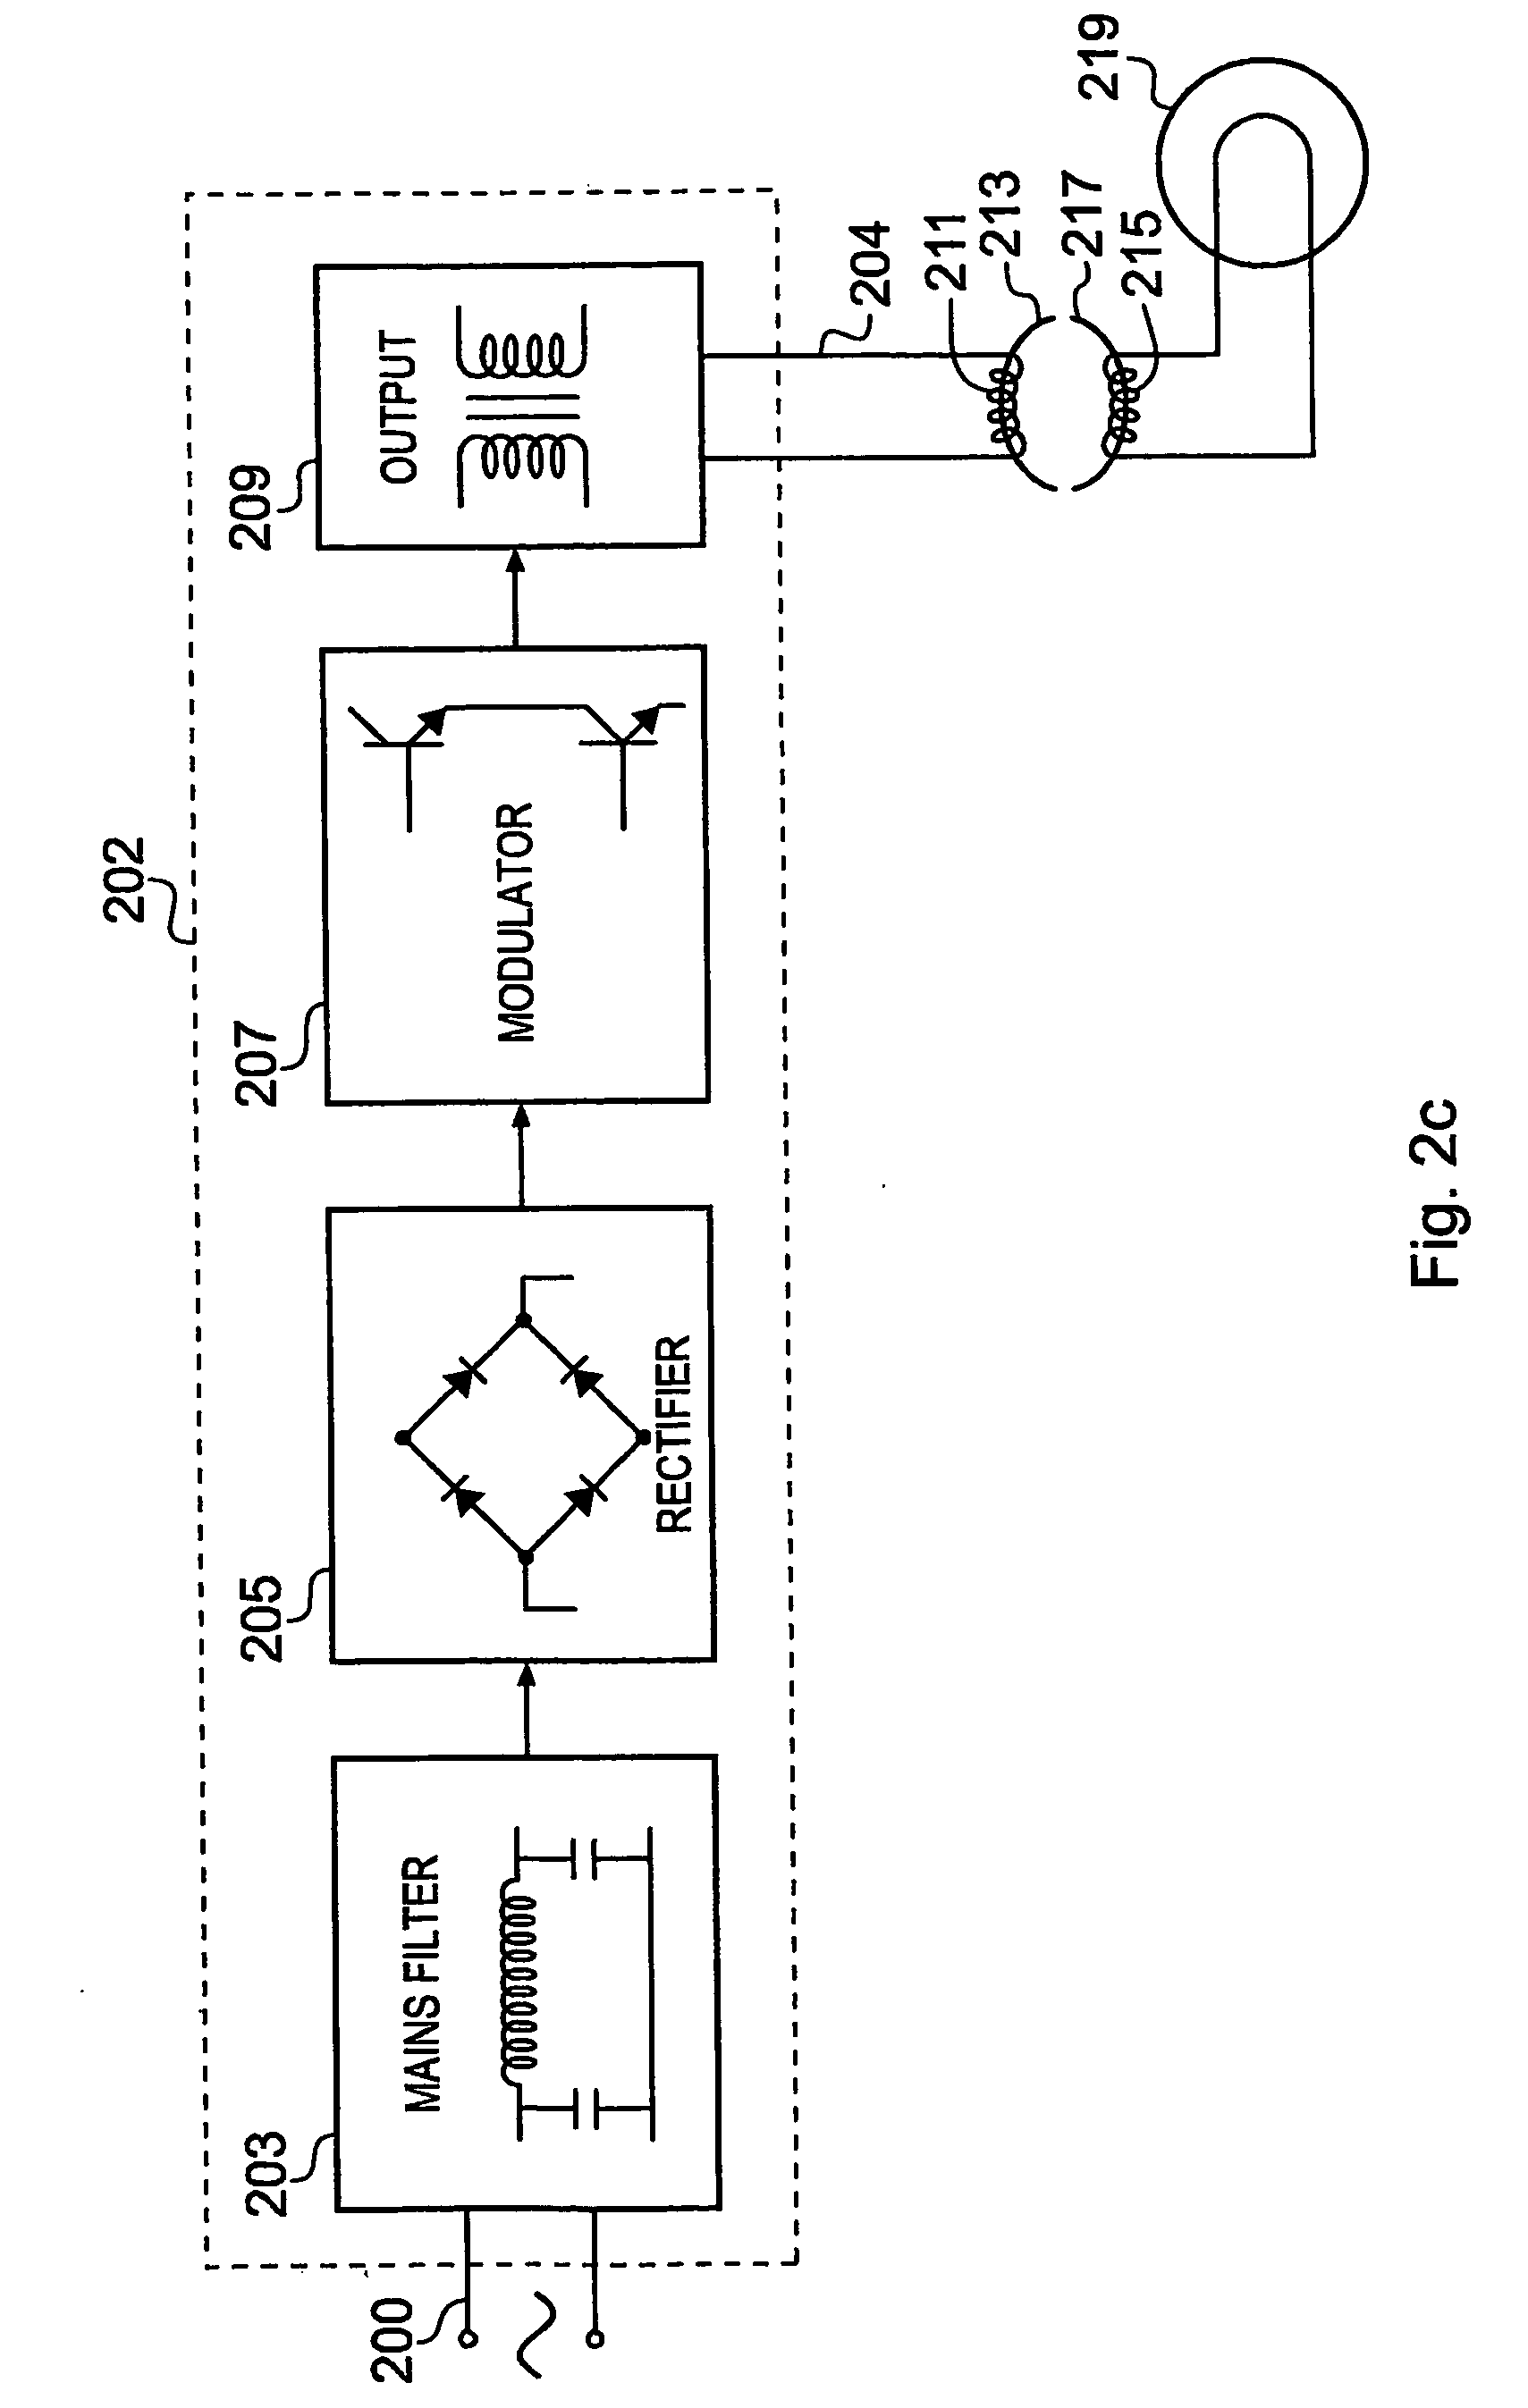 Apparatus for supplying energy to a load and a related system